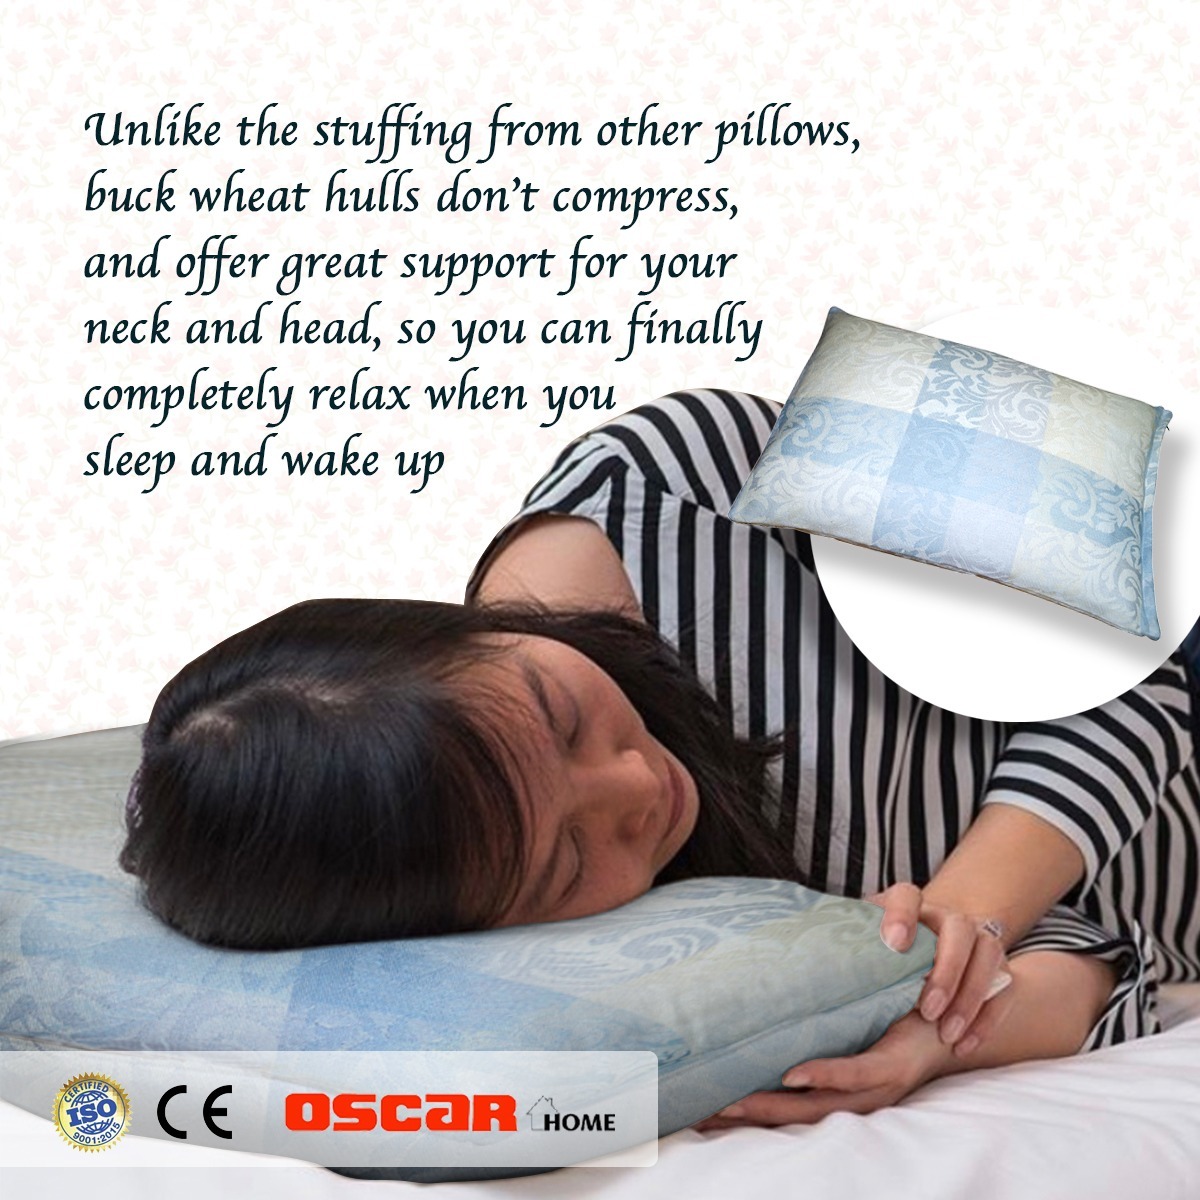 Organic Buckwheat Pillow for people with posture, neck, insomnia & spine issues